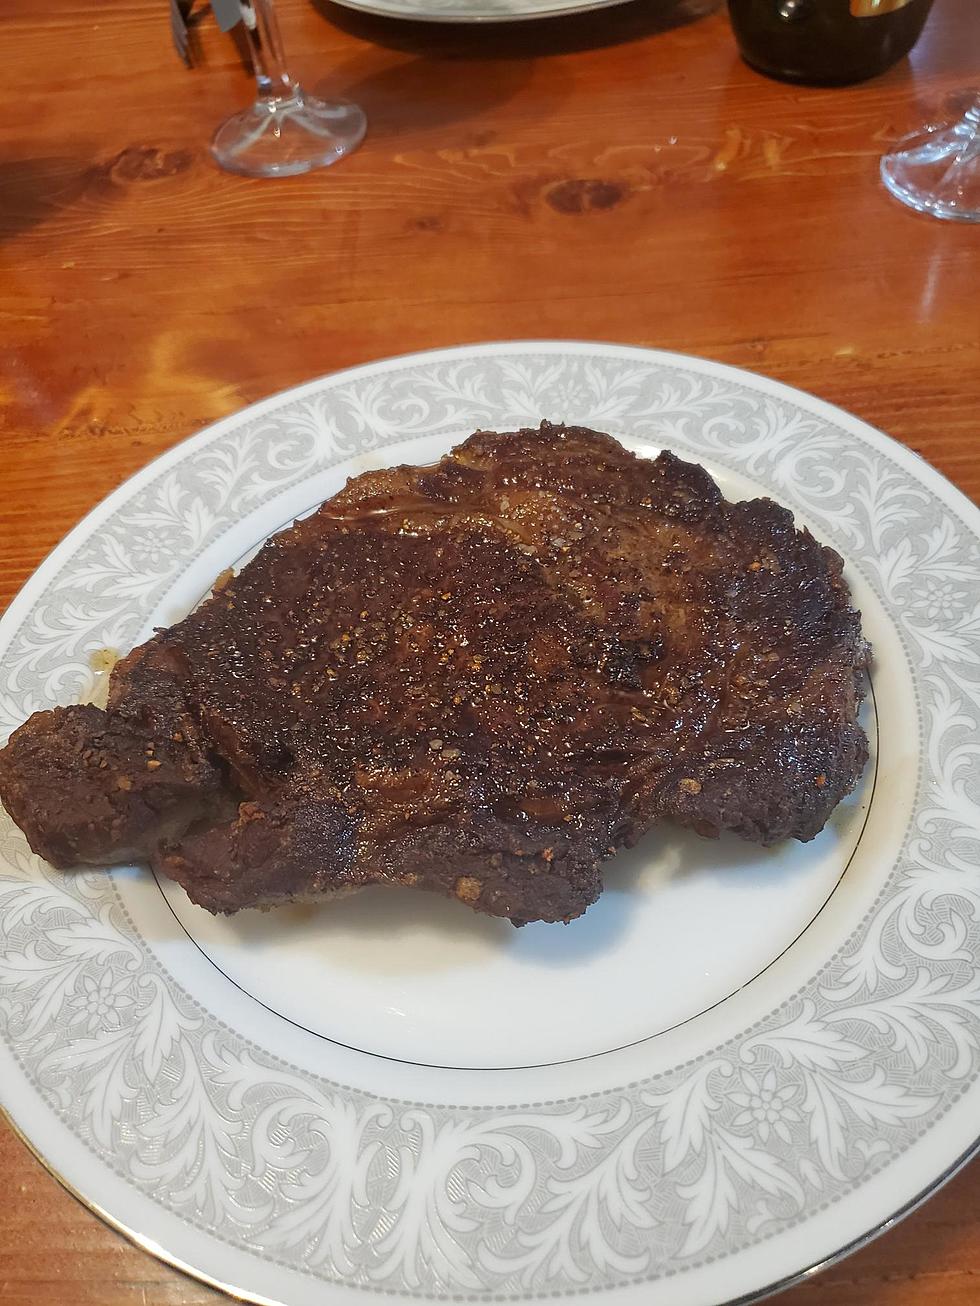 Have You Heard Of Reverse Searing Steaks?